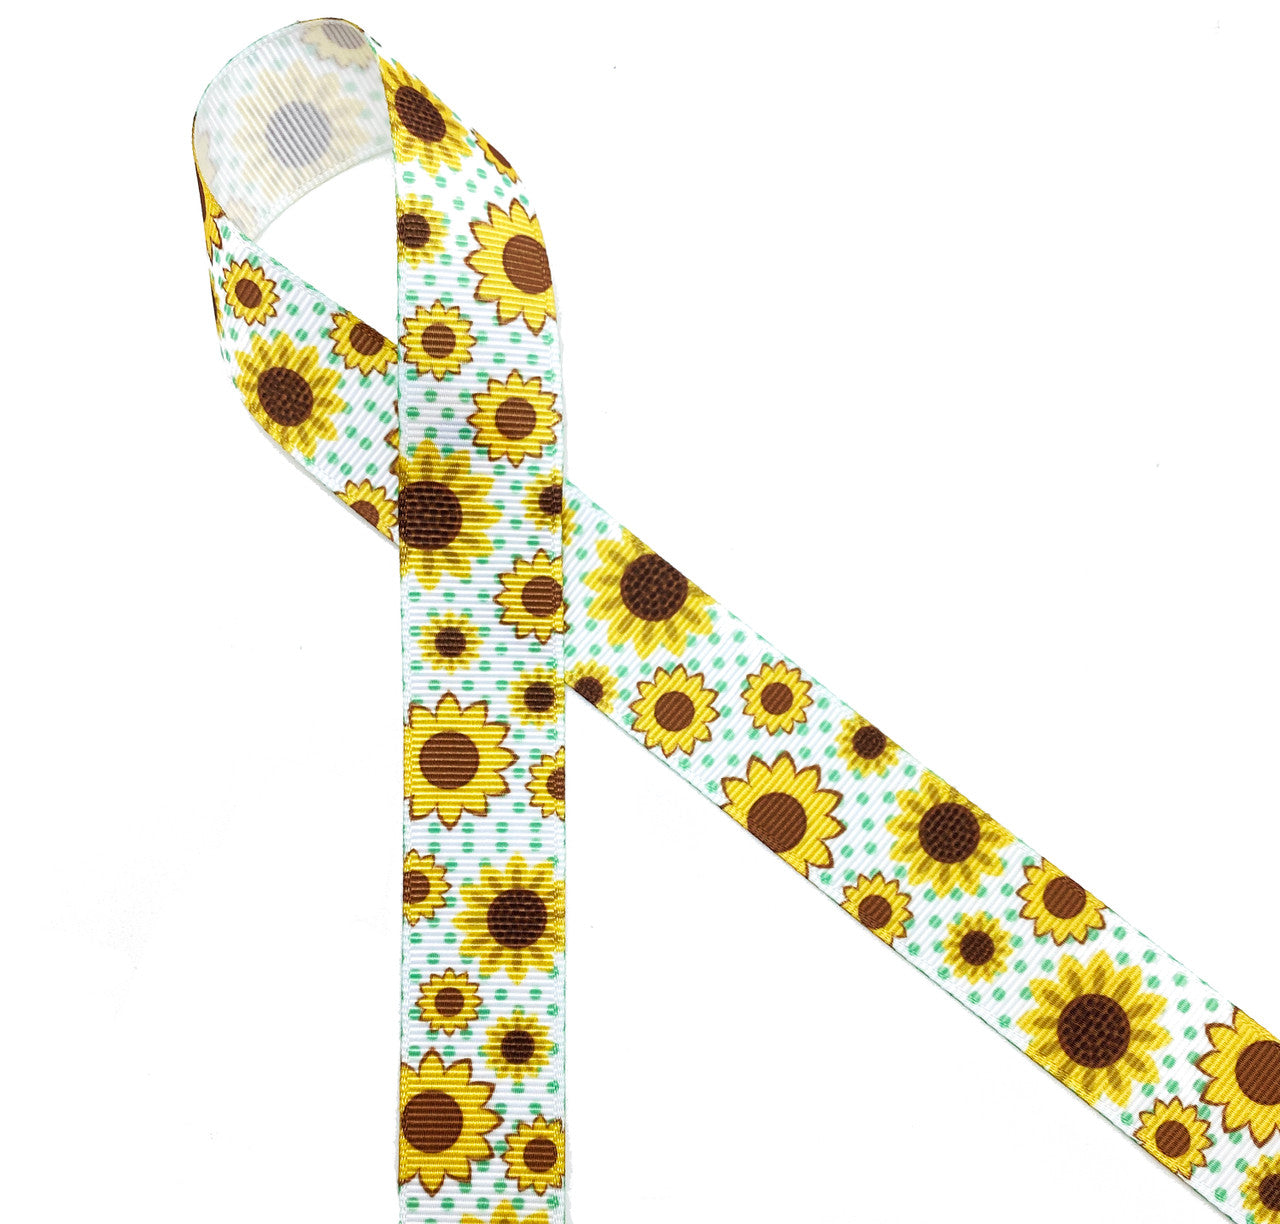 Sunflower in yellow and brown with green pin dots printed on 7/8" white grosgrain ribbon is the perfect ribbon for end of Summer and early Fall events! This fun ribbon is ideal for Barn theme weddings, Country weddings, Fall gift wrap, party decor and gift baskets. This is also a great ribbon for hair bows,  Fall crafts, quilting and sewing projects. All our ribbon is designed and printed in the USA